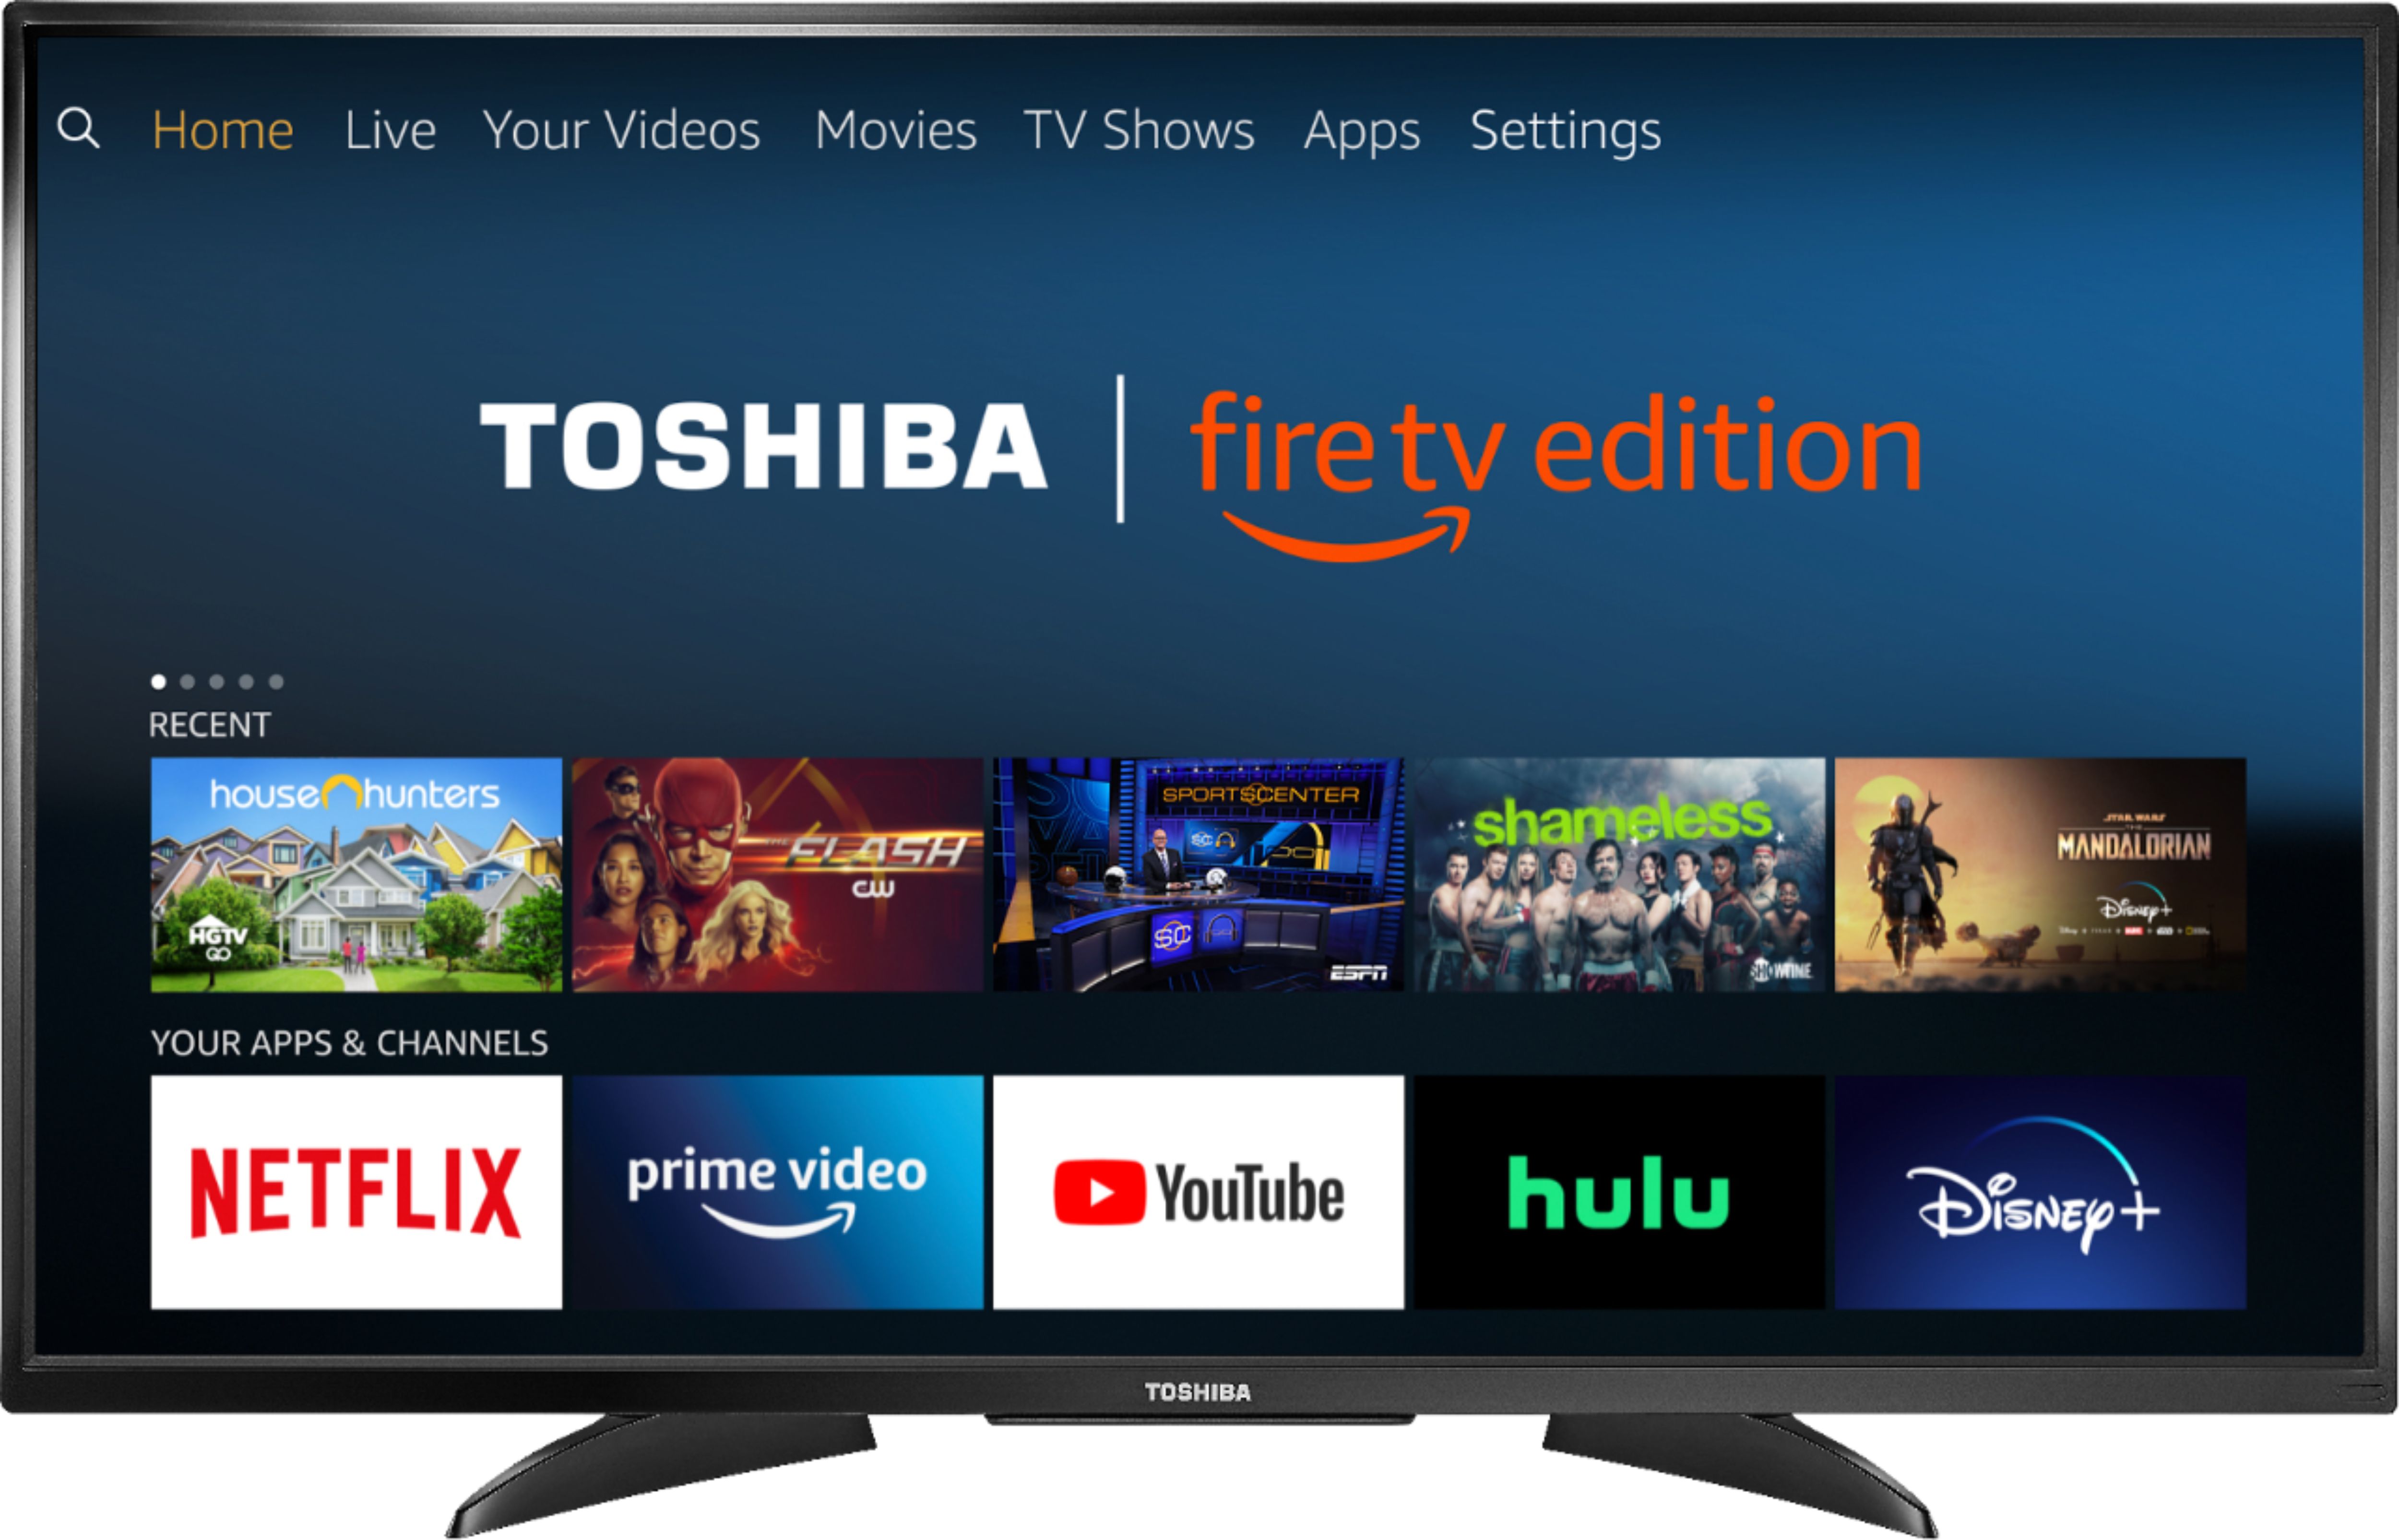 How to Install Play Store on Toshiba Smart TV?